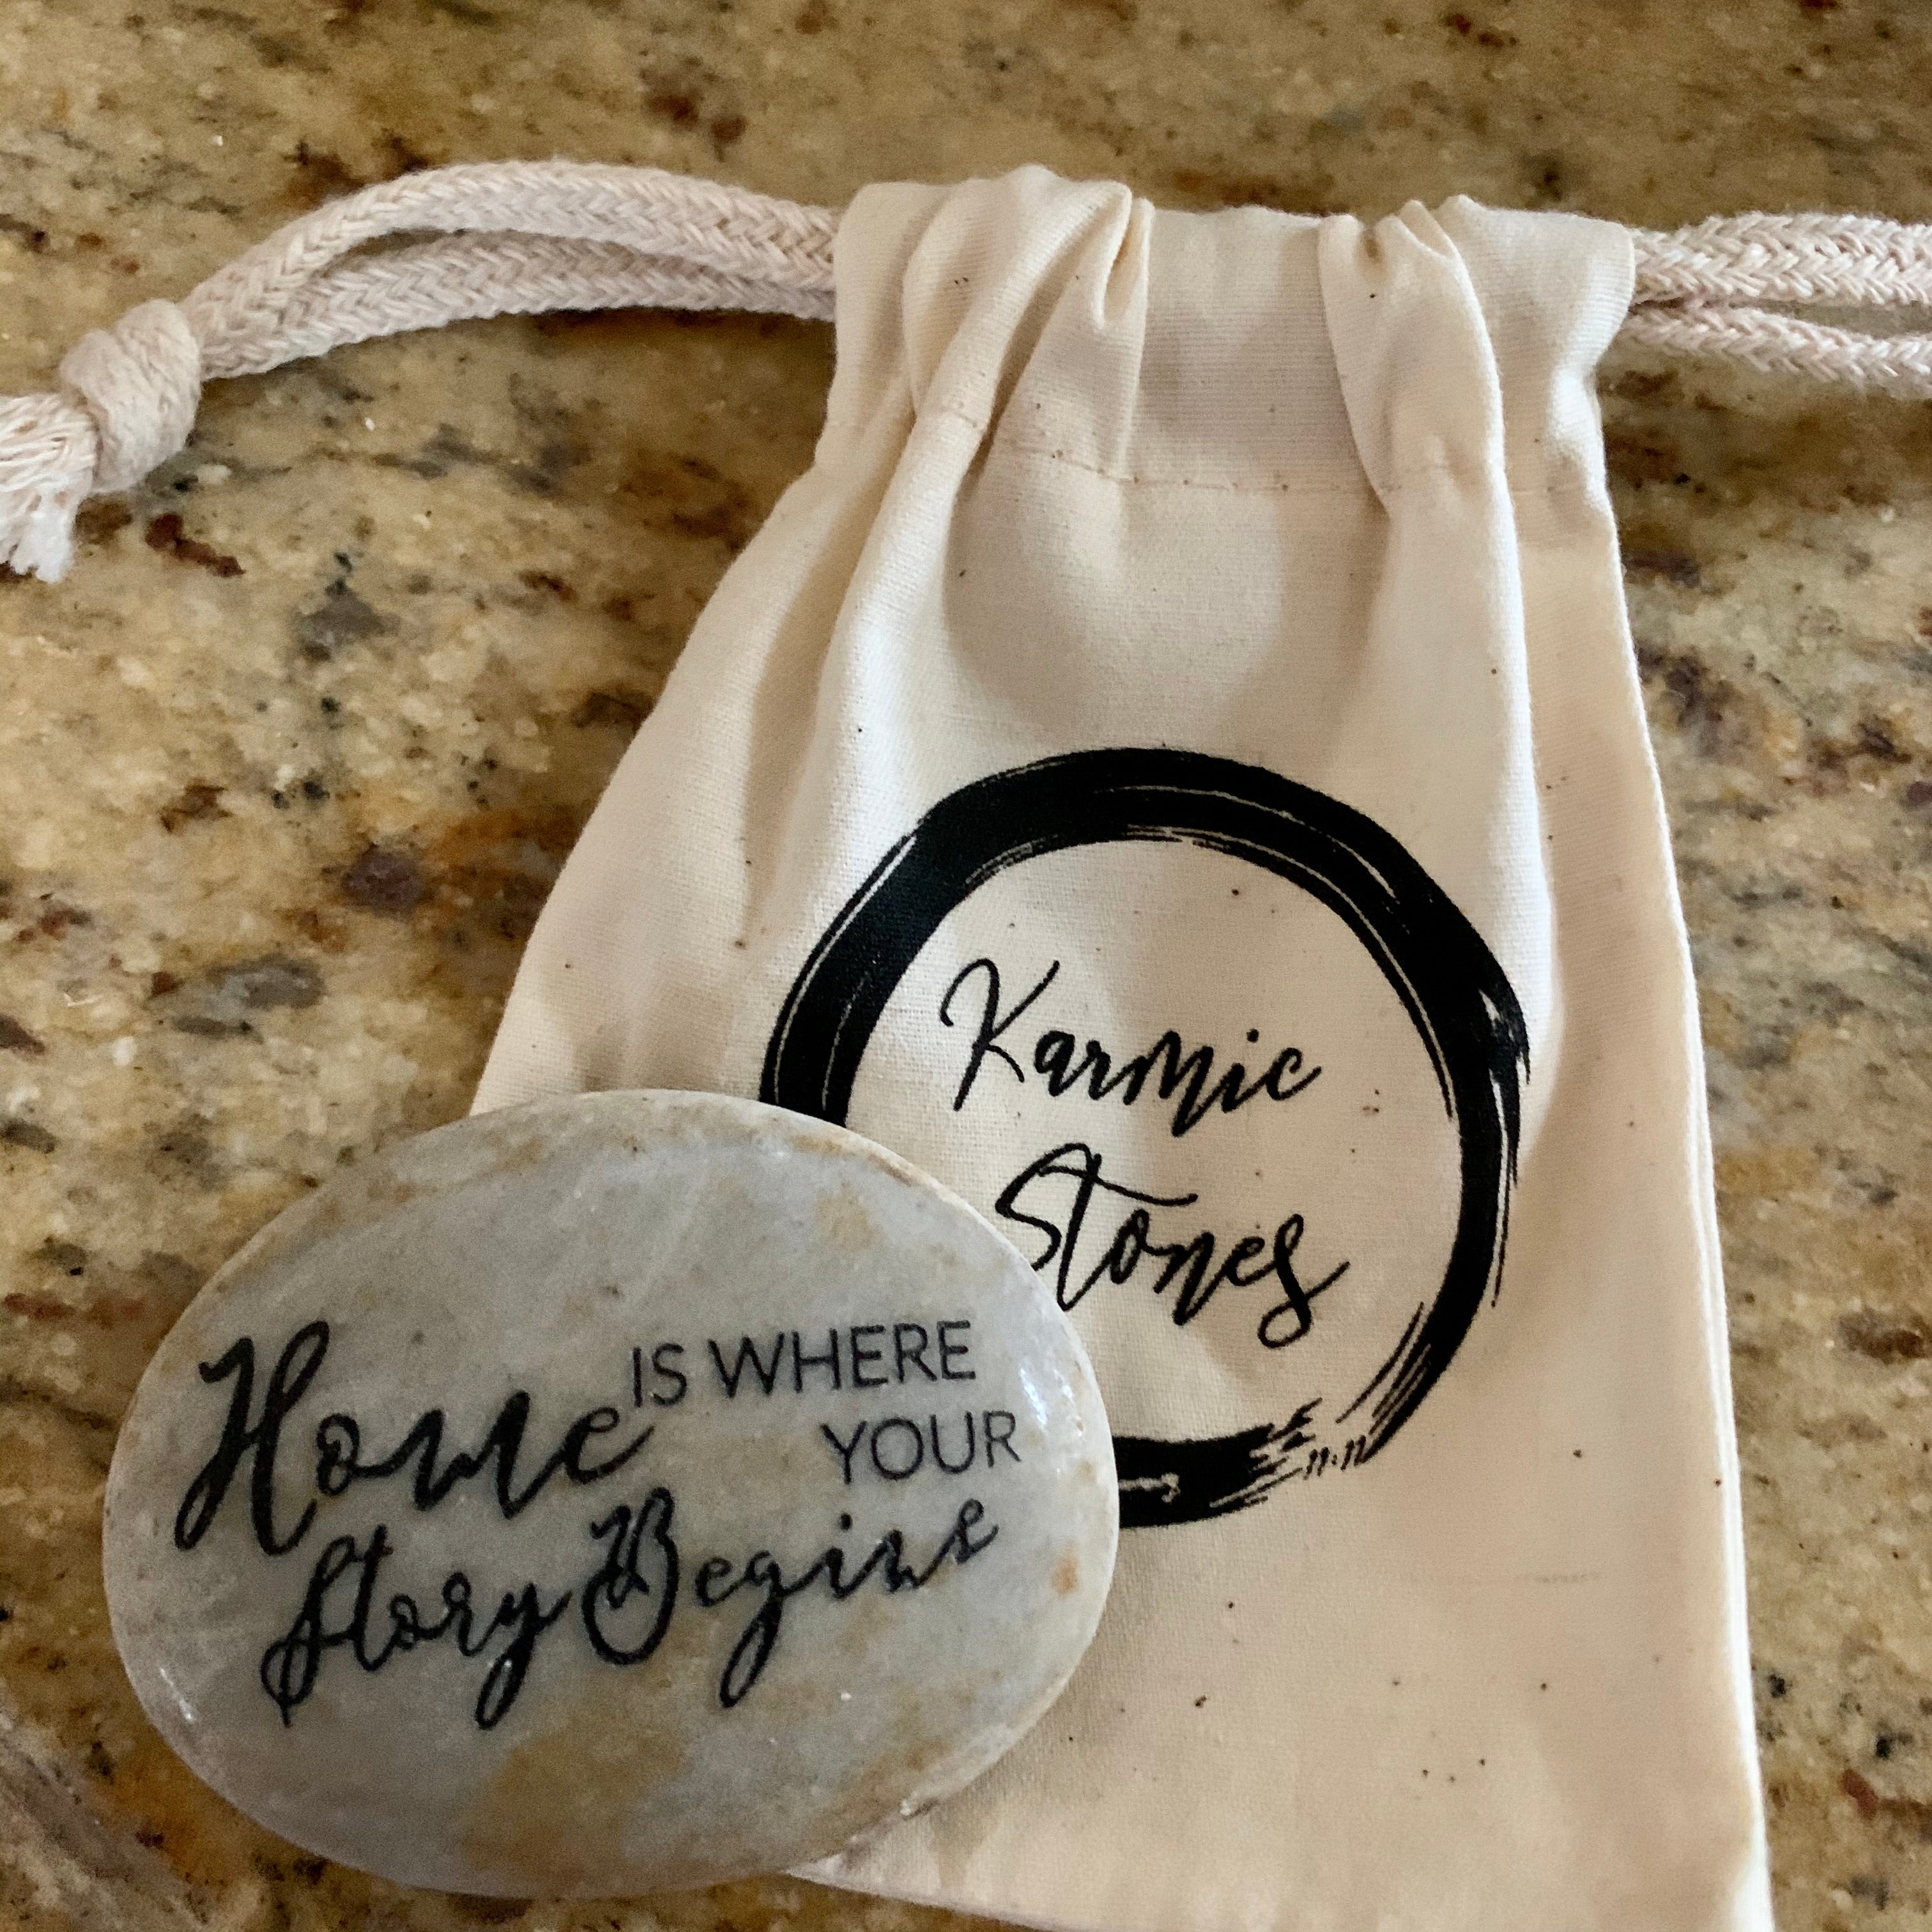 Home Is Where Your Story Begins ~ Engraved Inspirational Rock